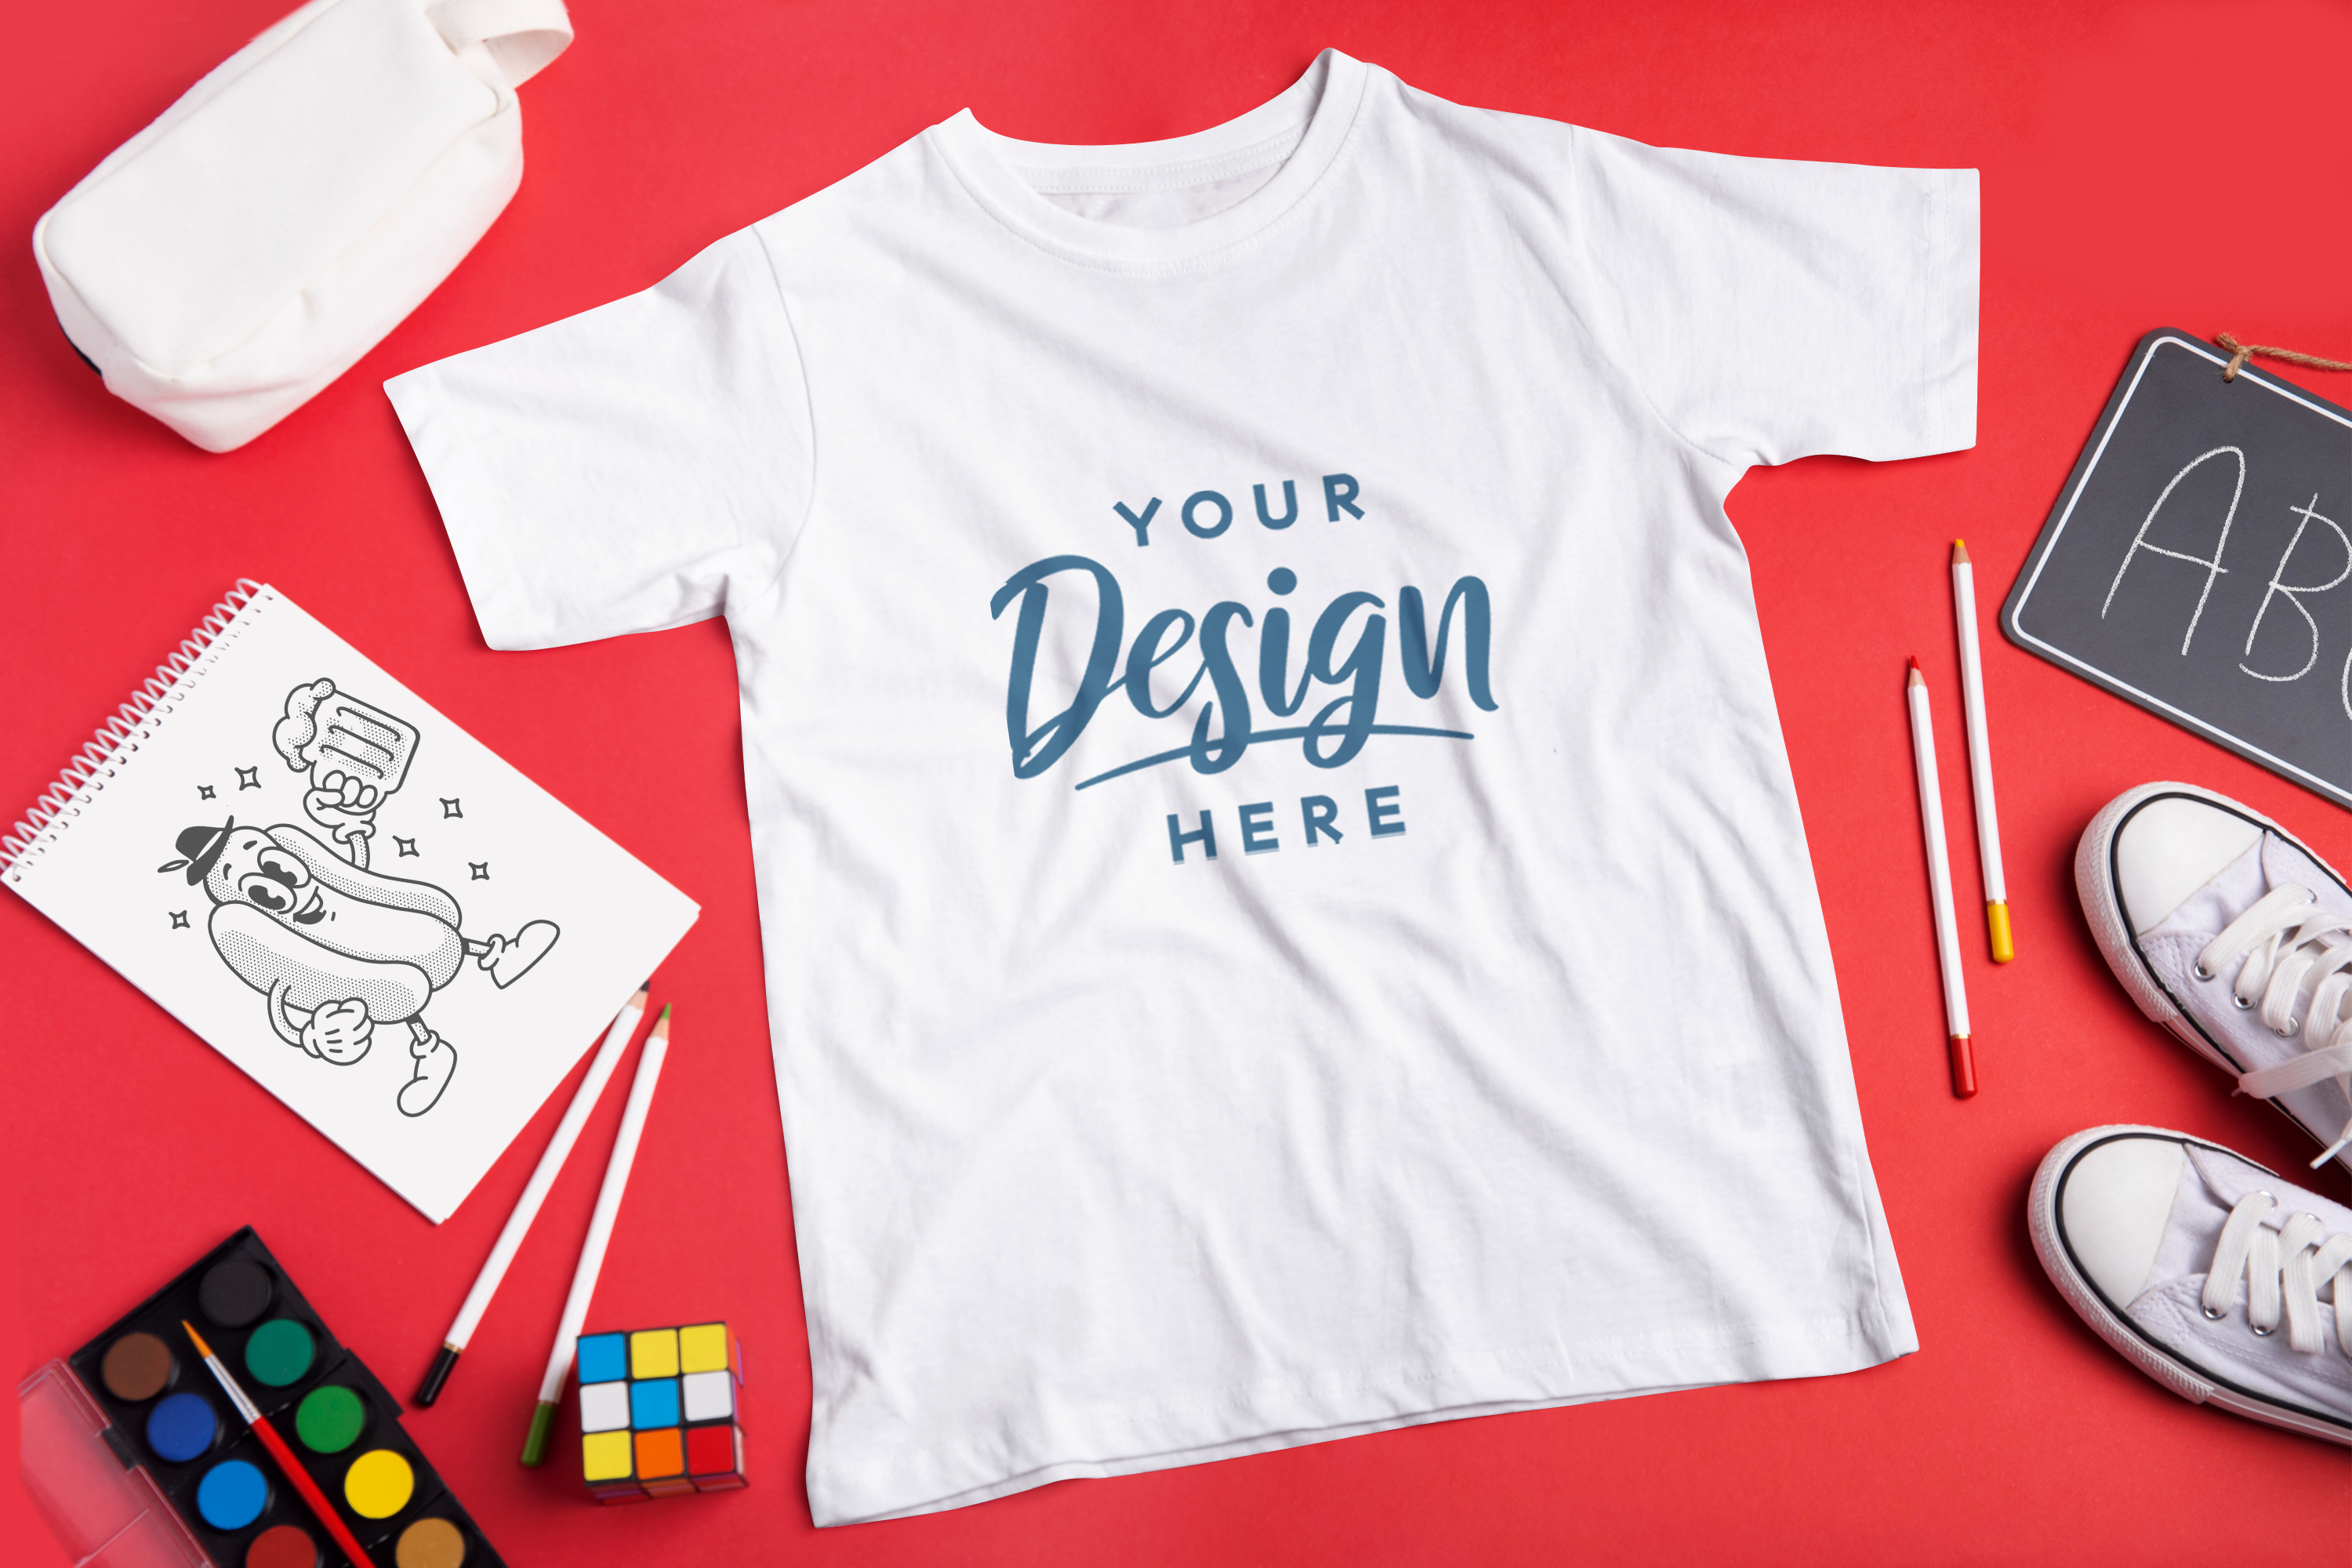 9 T-shirt design ideas that will sell in 2023